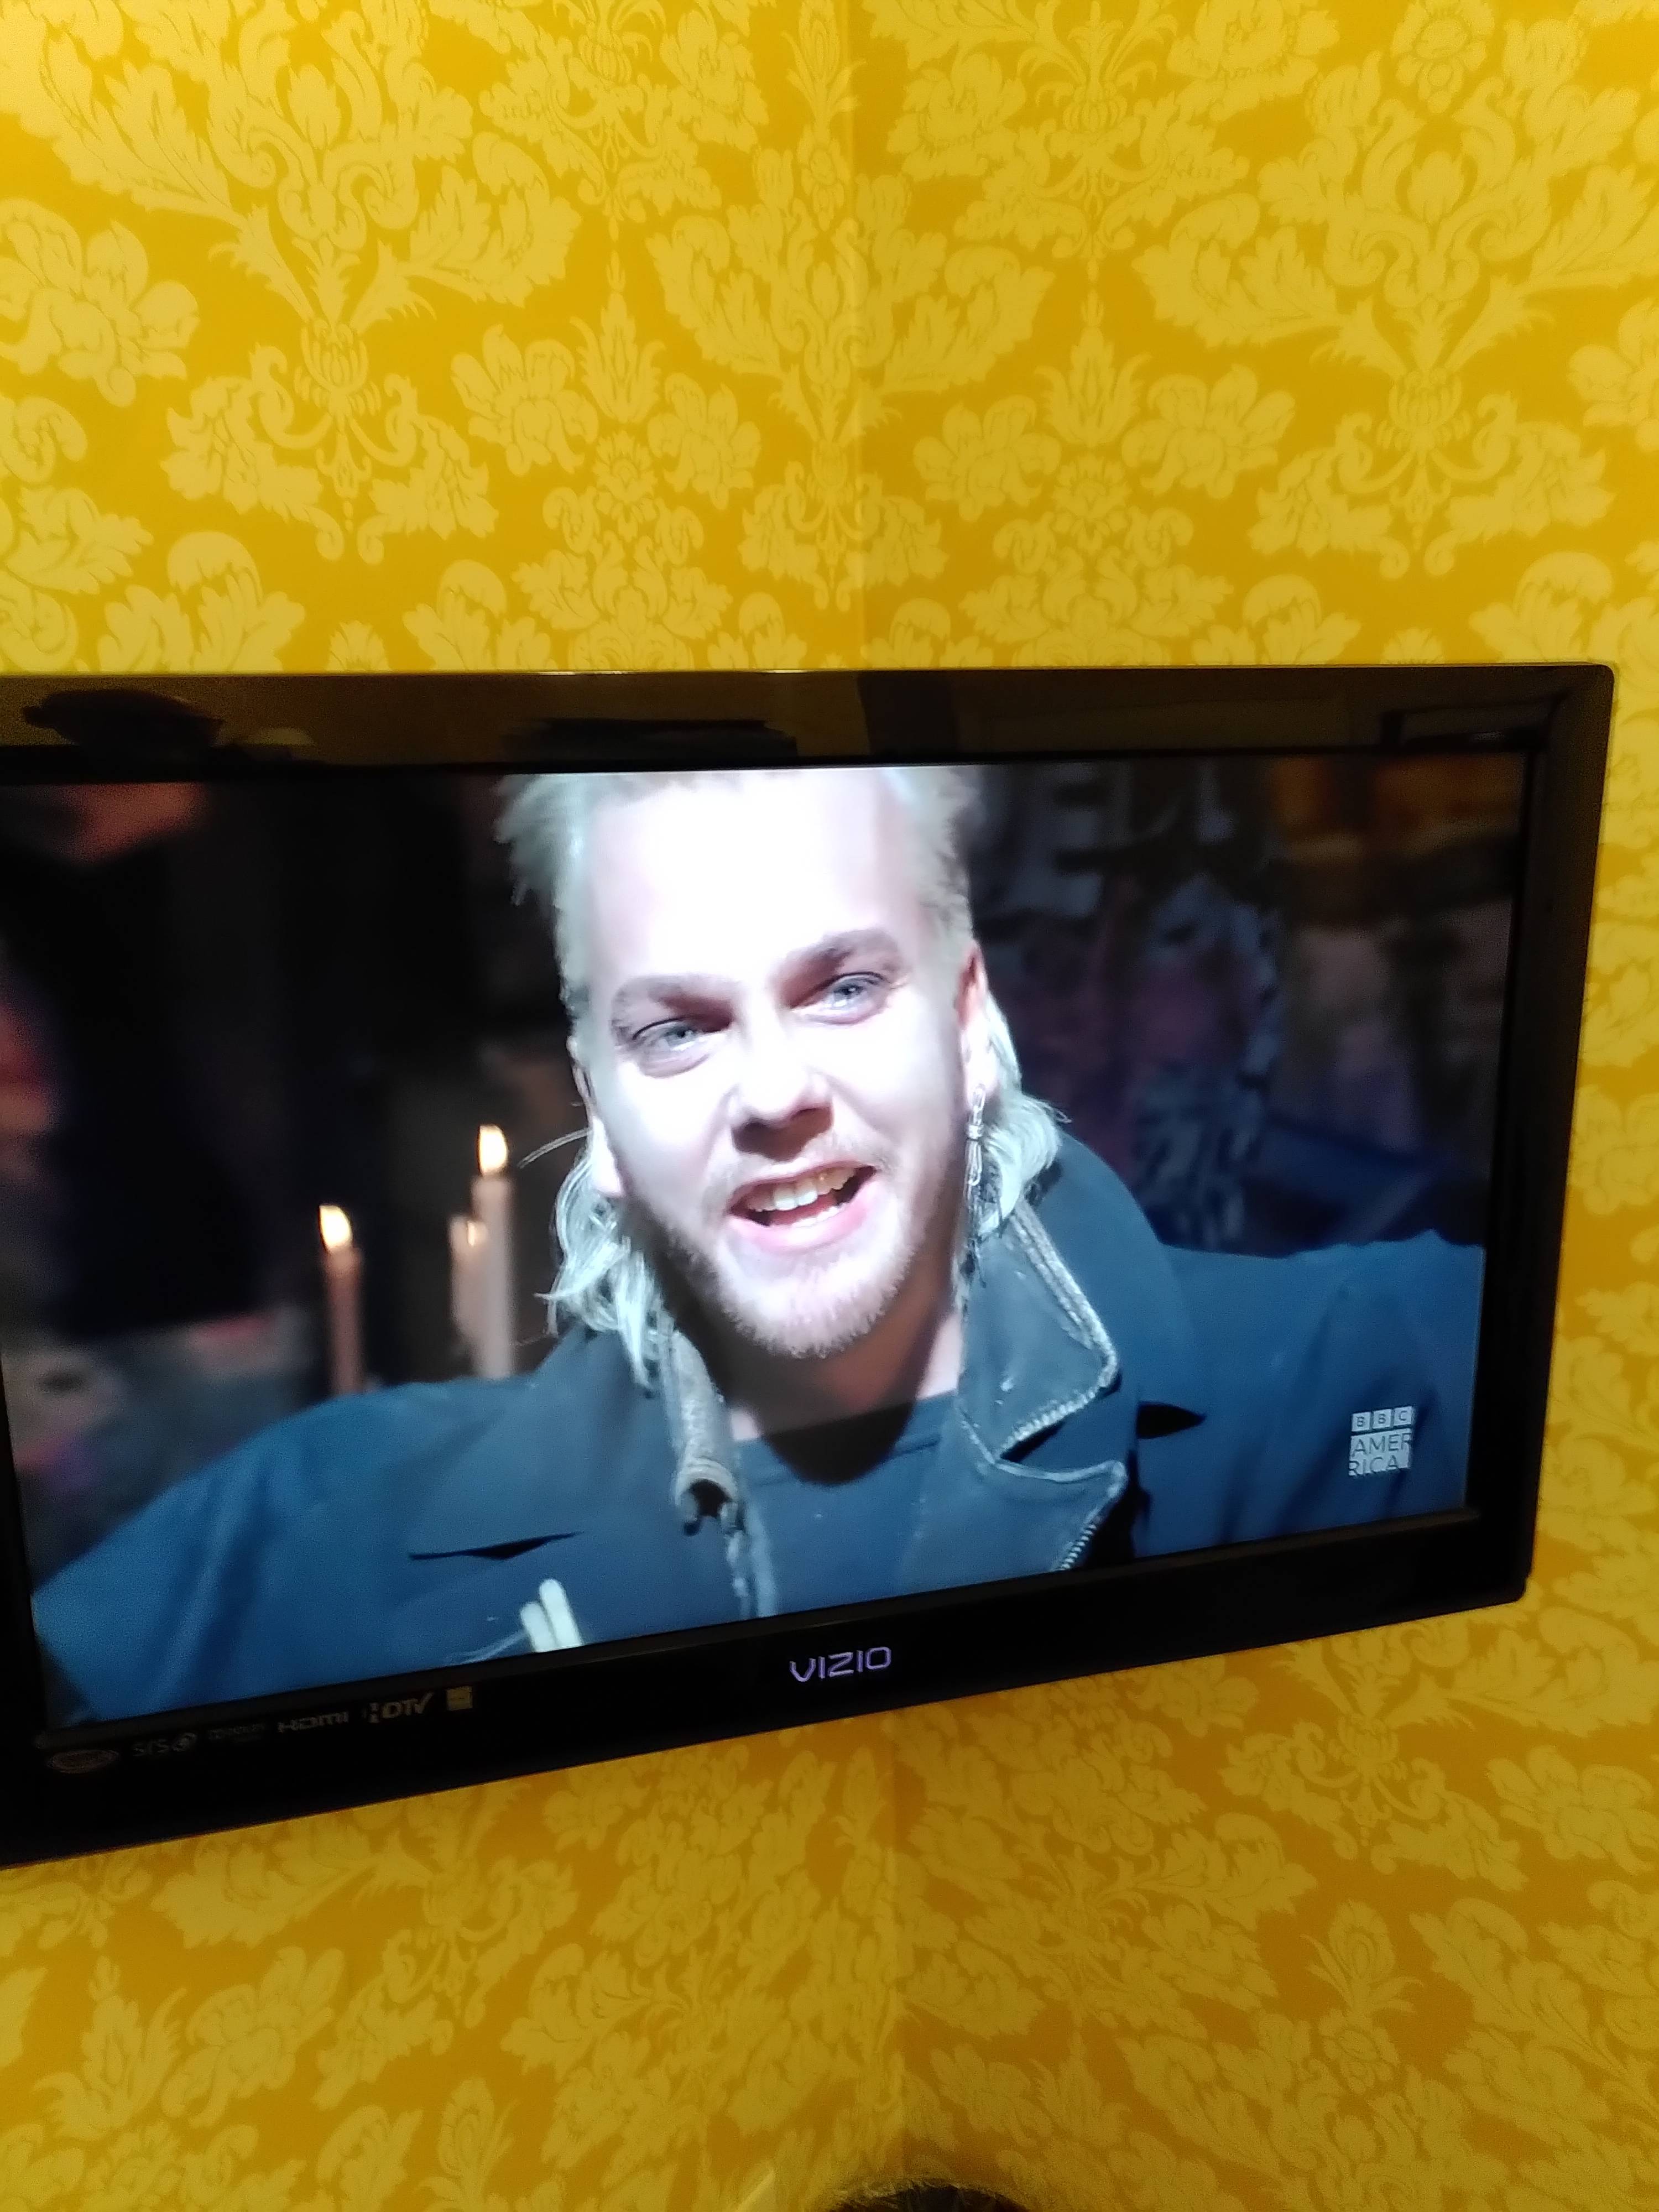 A slightly bearded white male in black clothes and a mullet smiling on the TV. Very yellow wall paper behind the TV.